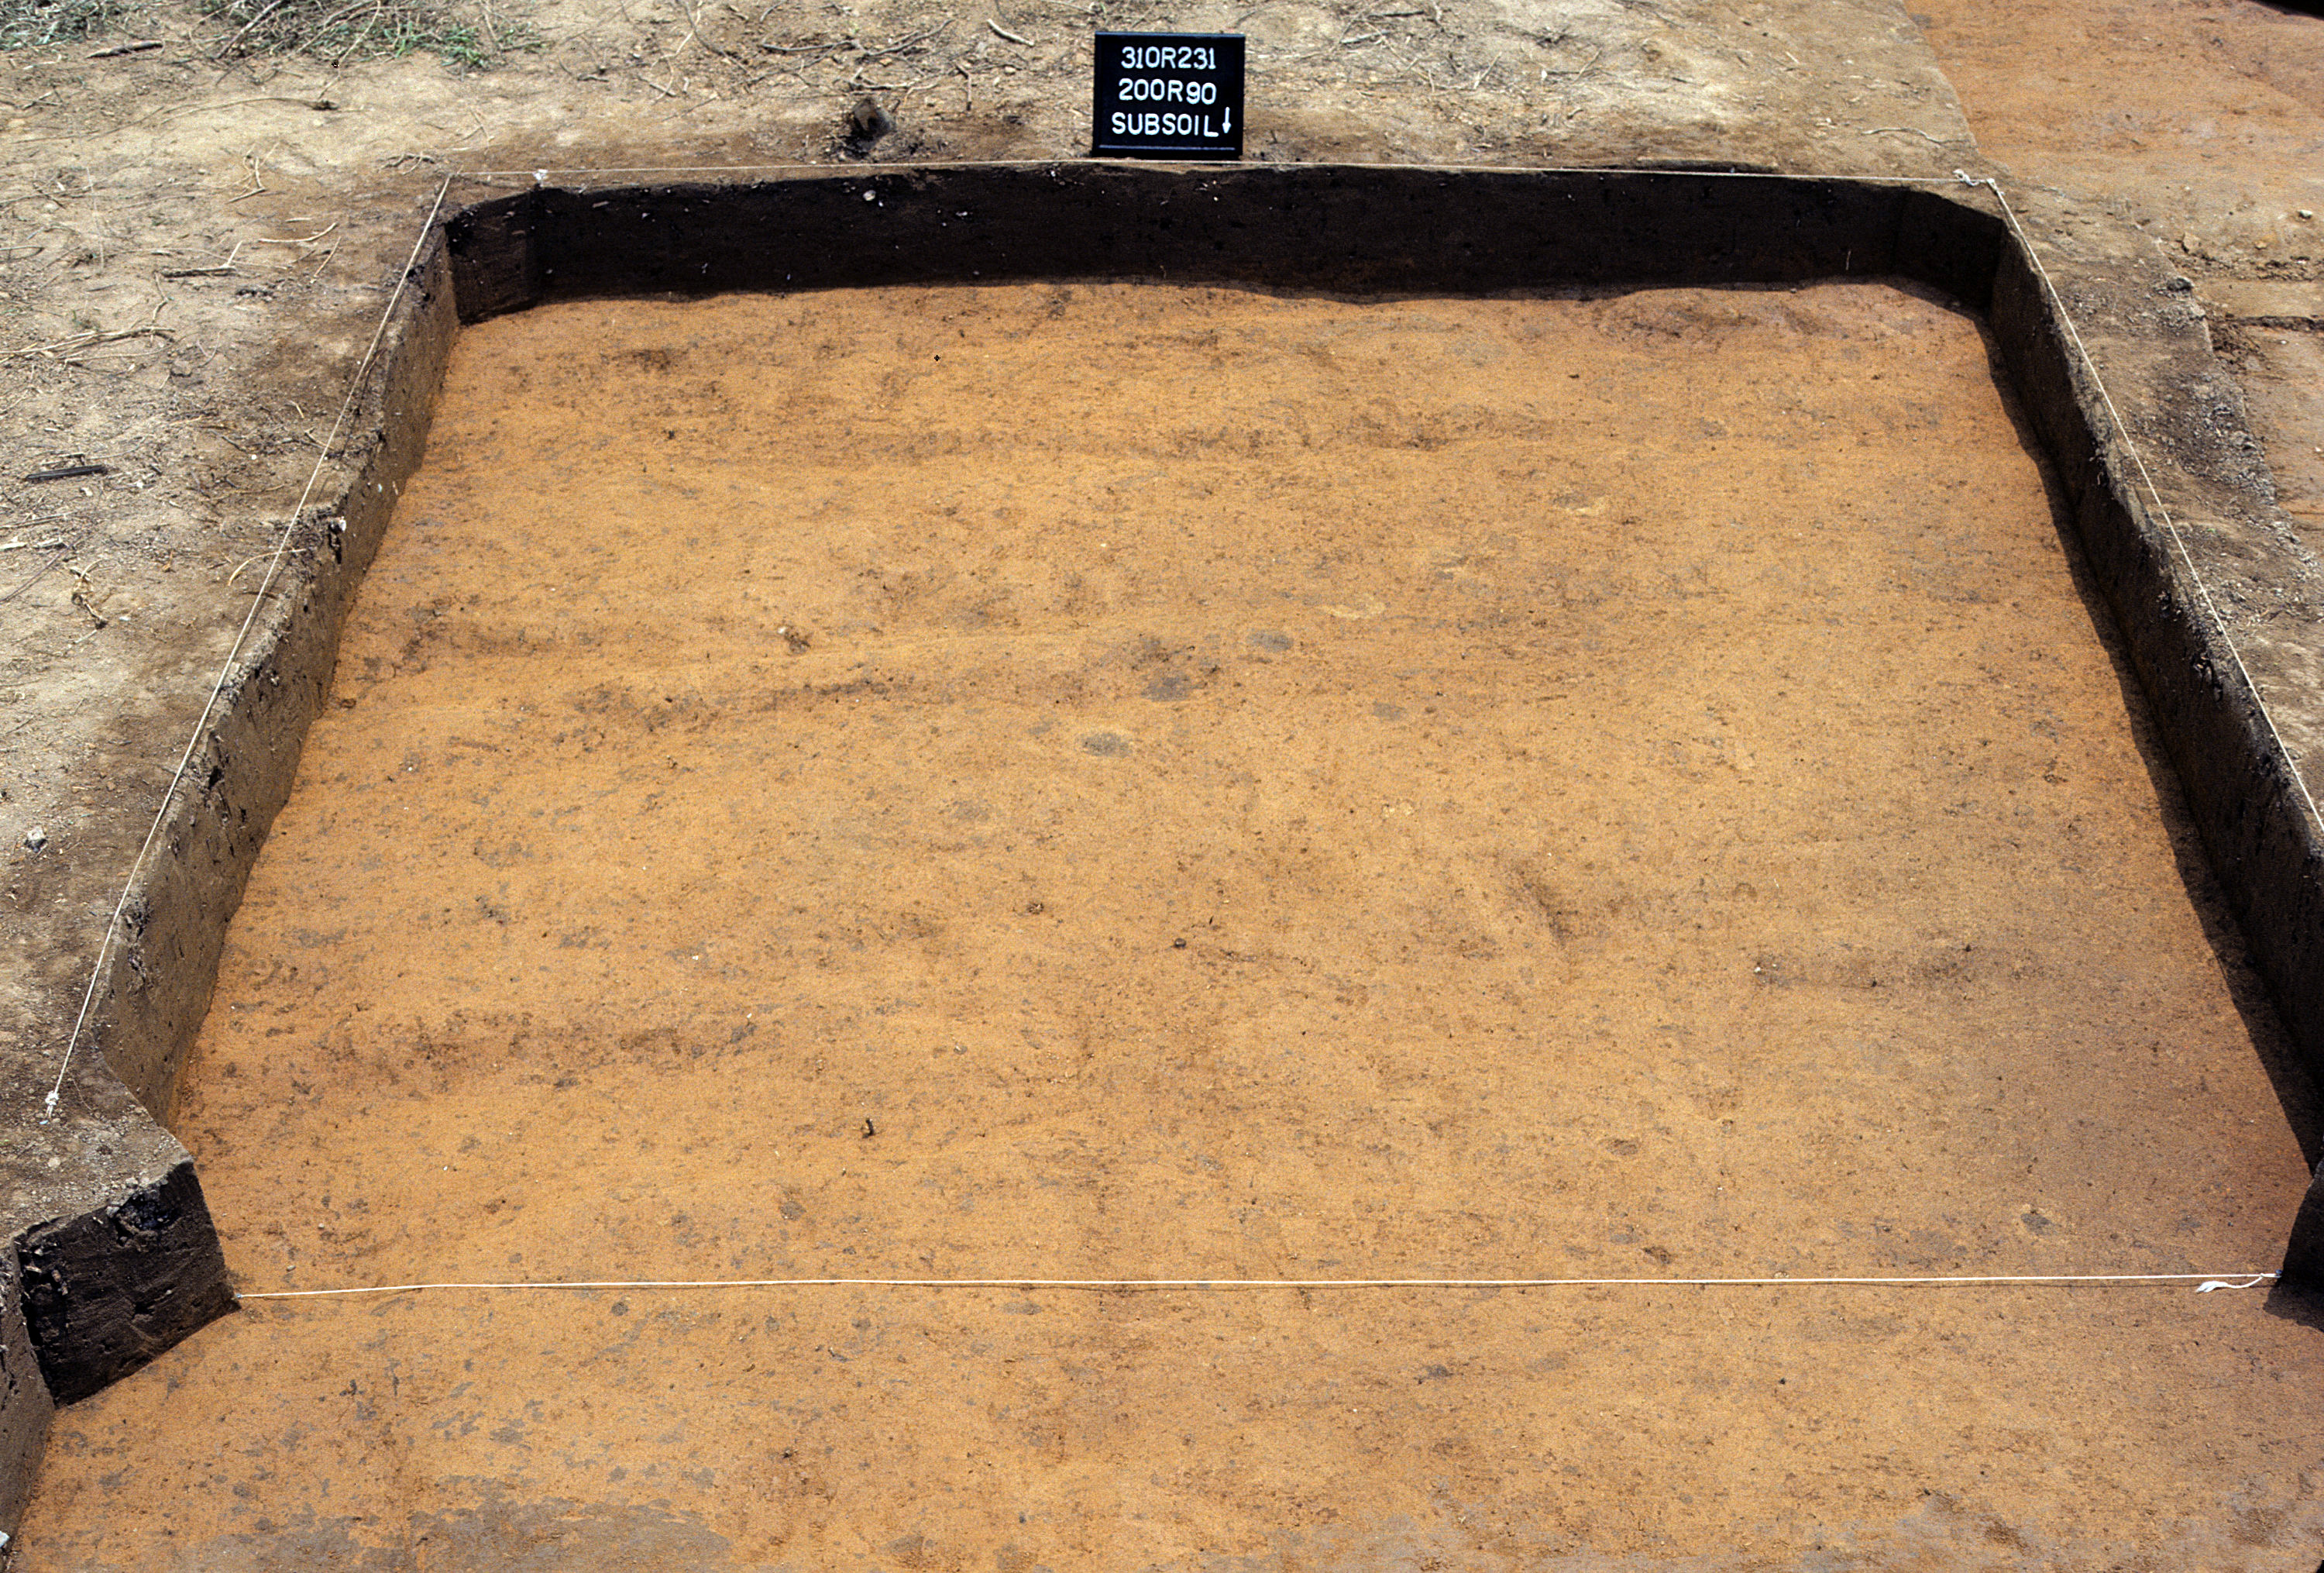 Figure 764. Sq. 200R90 at top of subsoil (view to south).